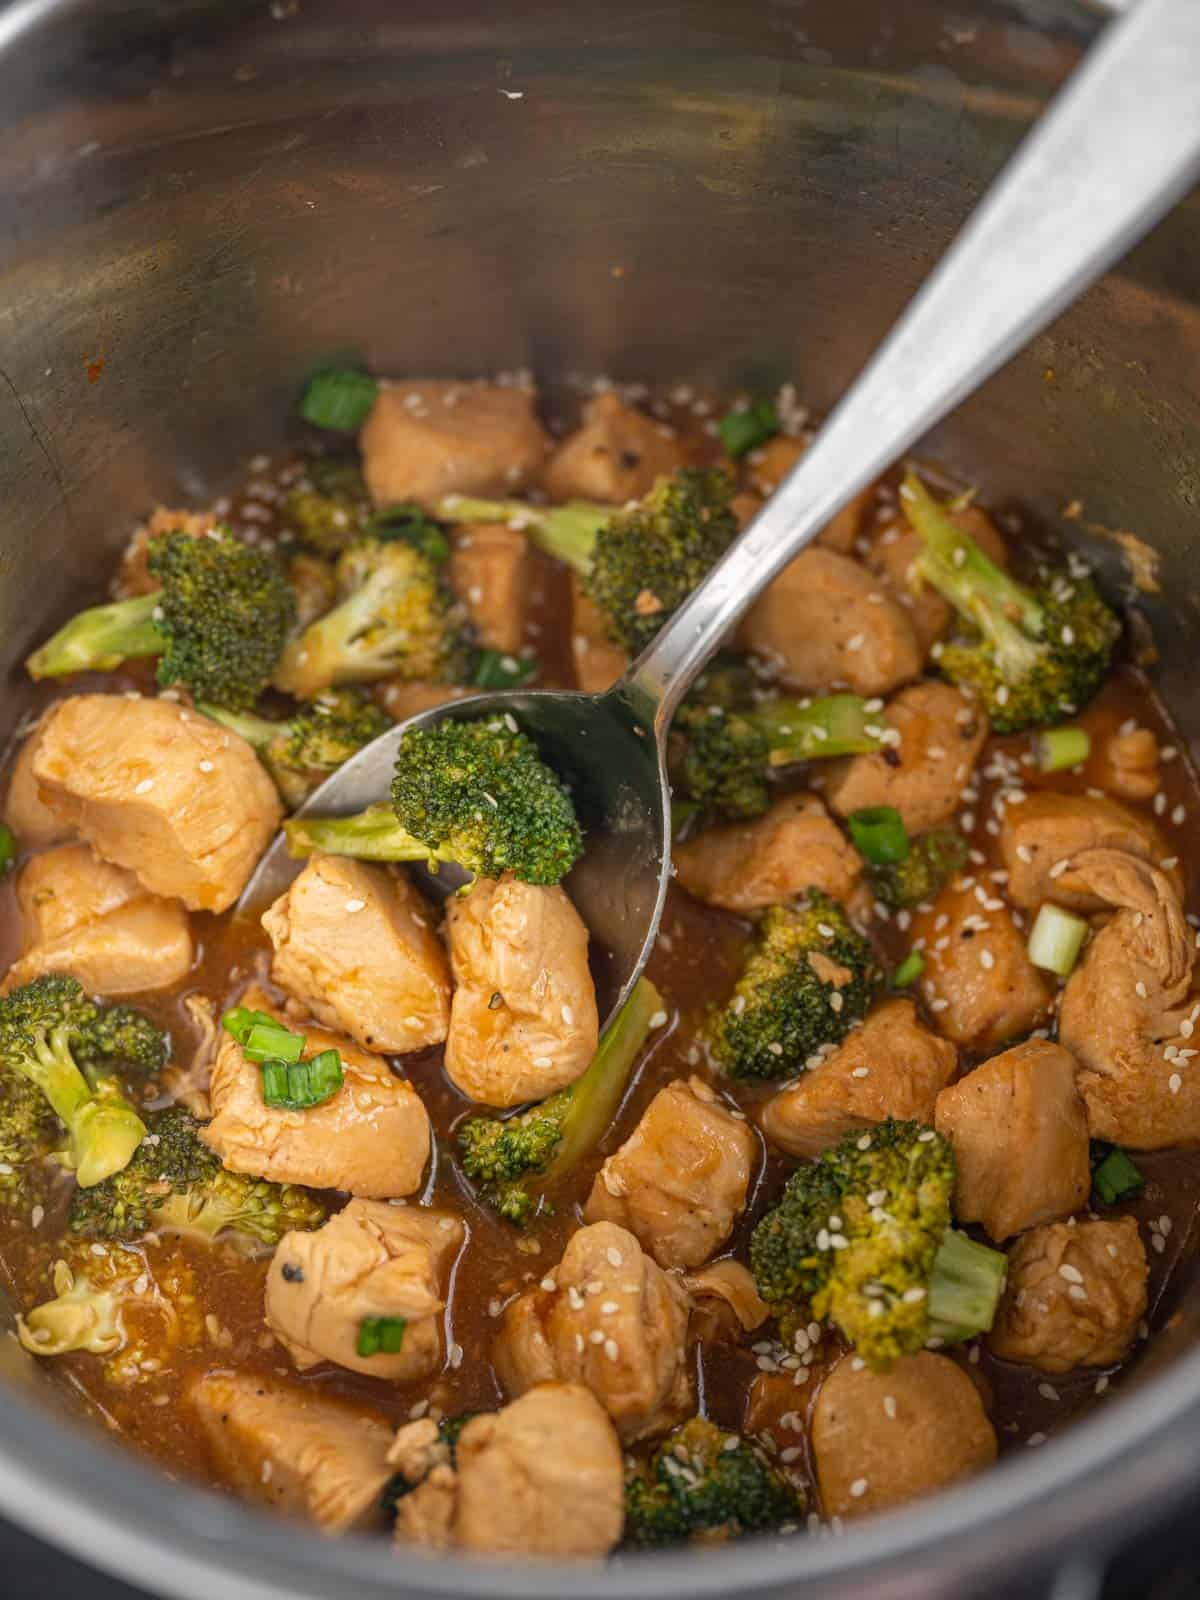 A spoon lifts a serving of chicken and broccoli from instant pot.